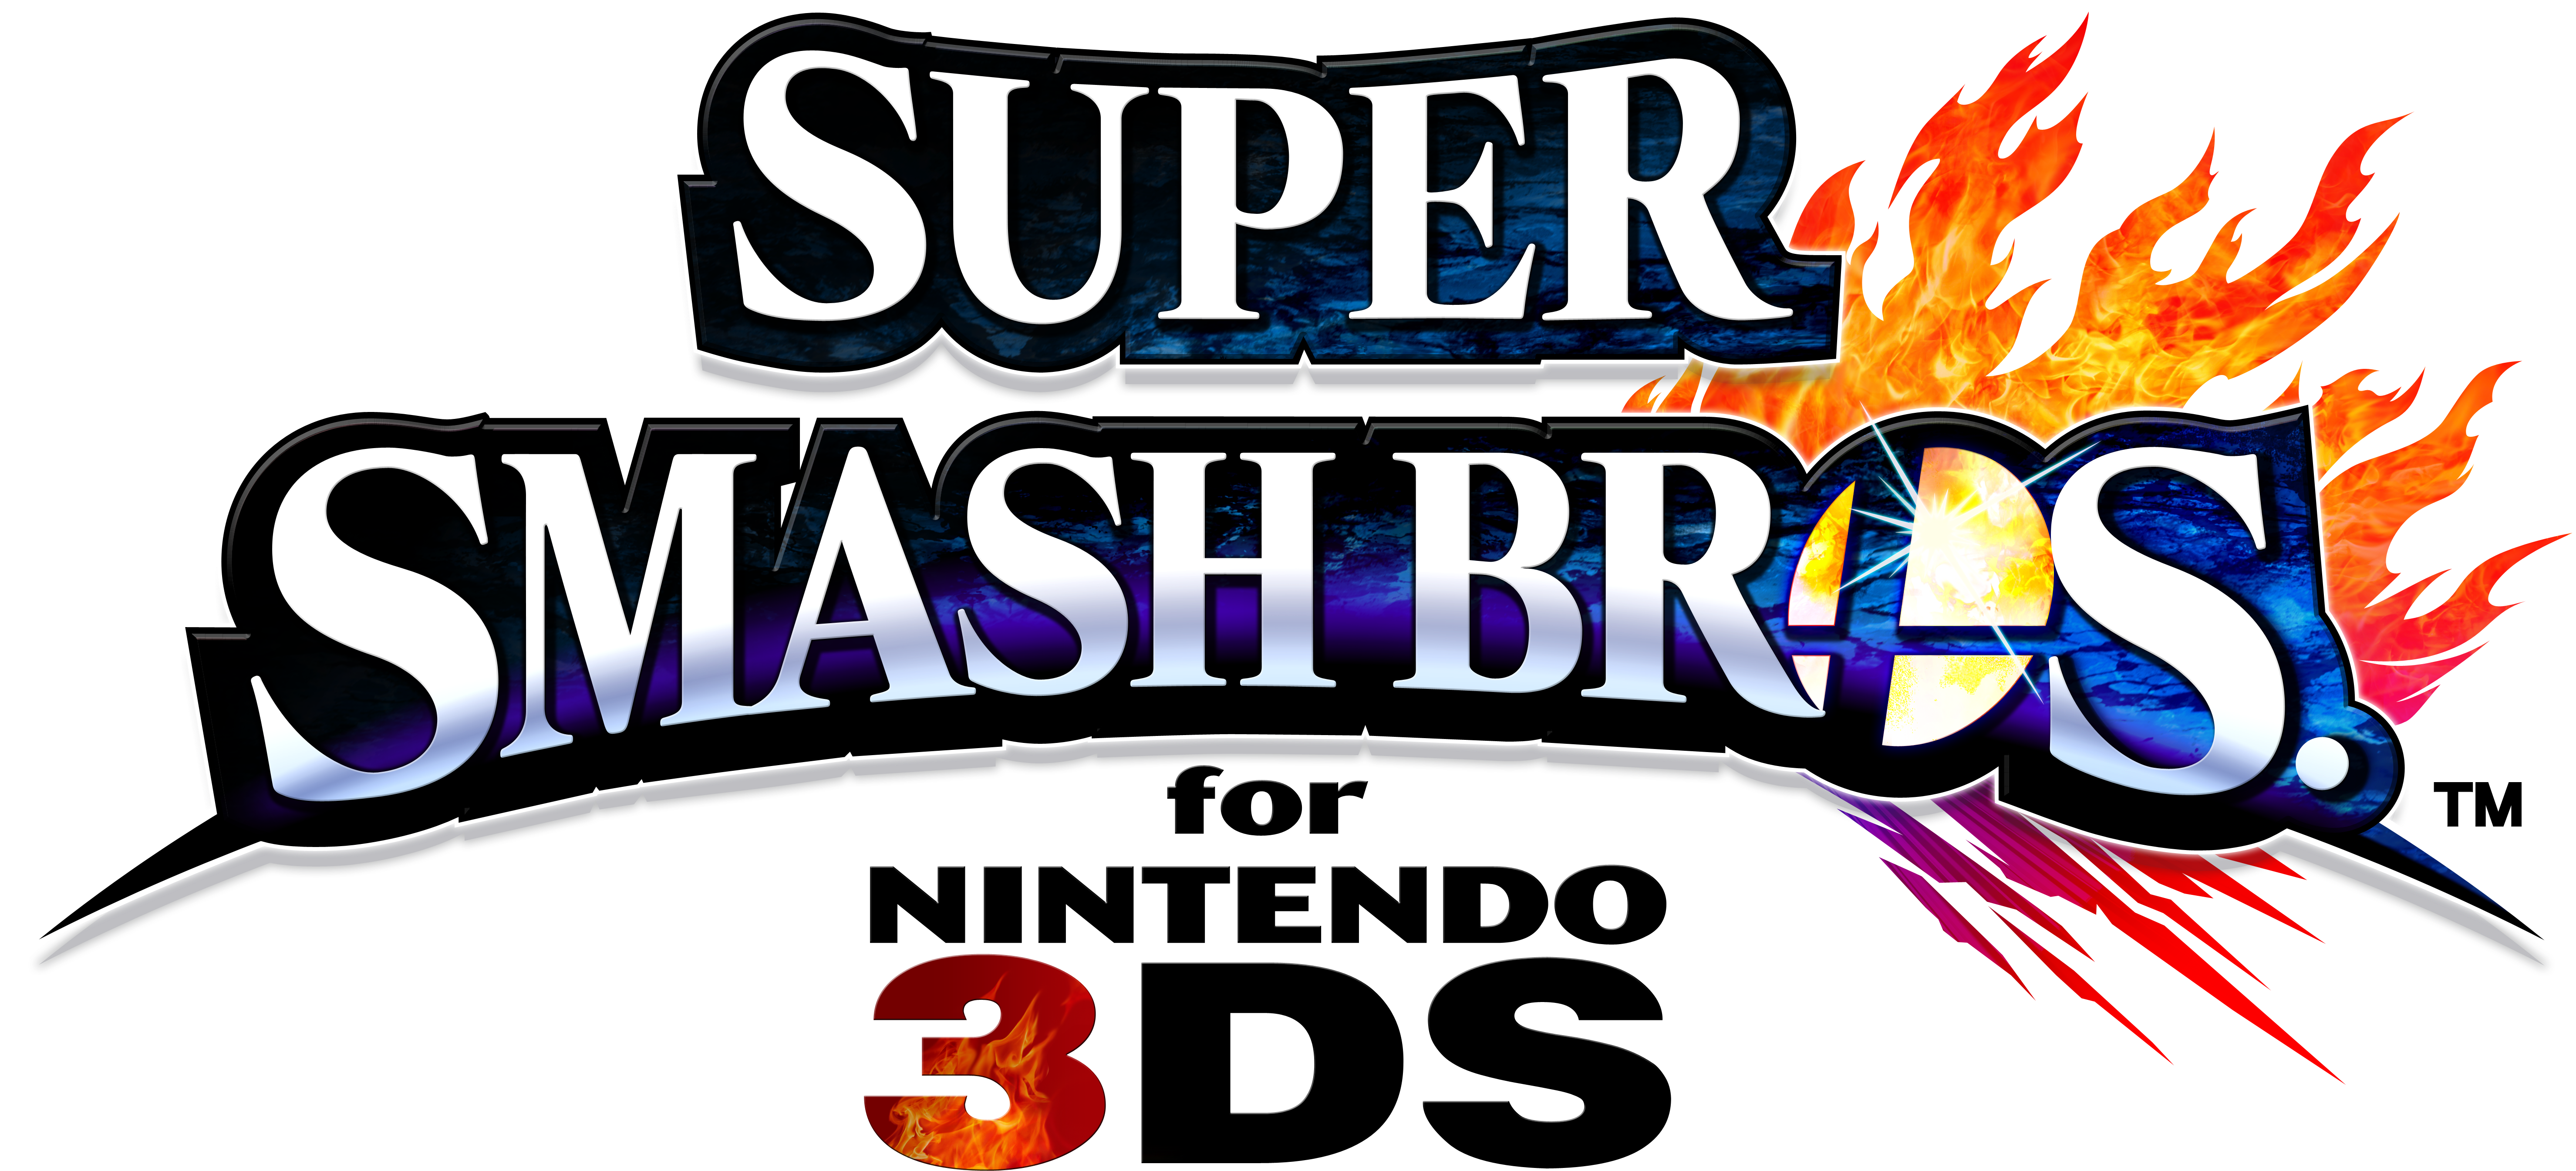 Hd - Super Smash Bros. For Nintendo 3ds And Wii U (6250x3000)